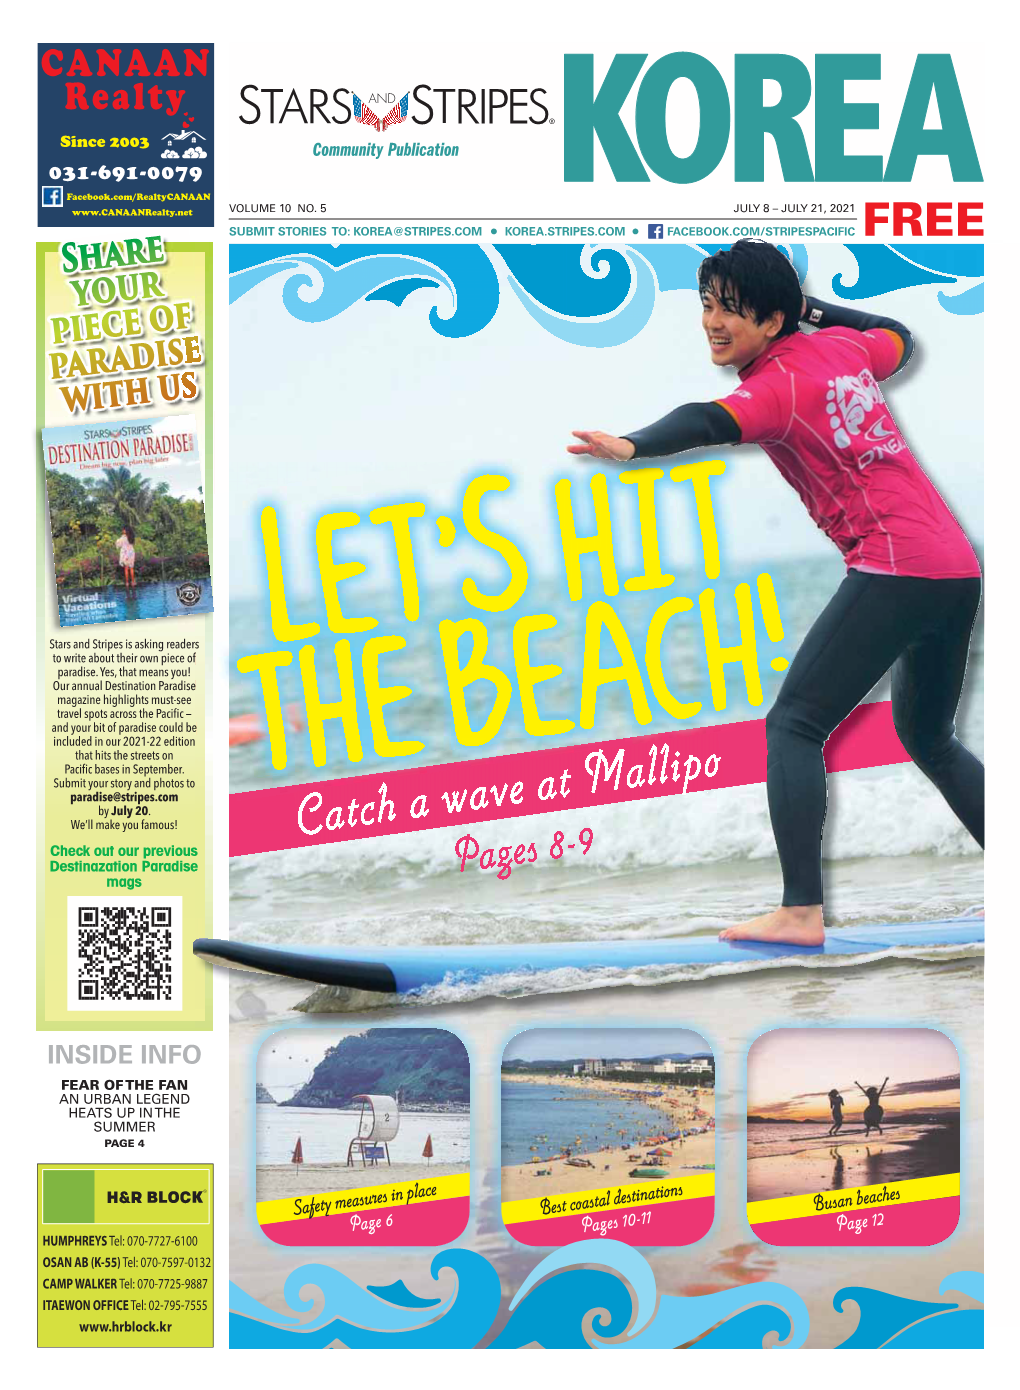 Catch a Wave at Mallipo Check out Our Previouss Destinazation Paradisee Pages 8-9 Mags